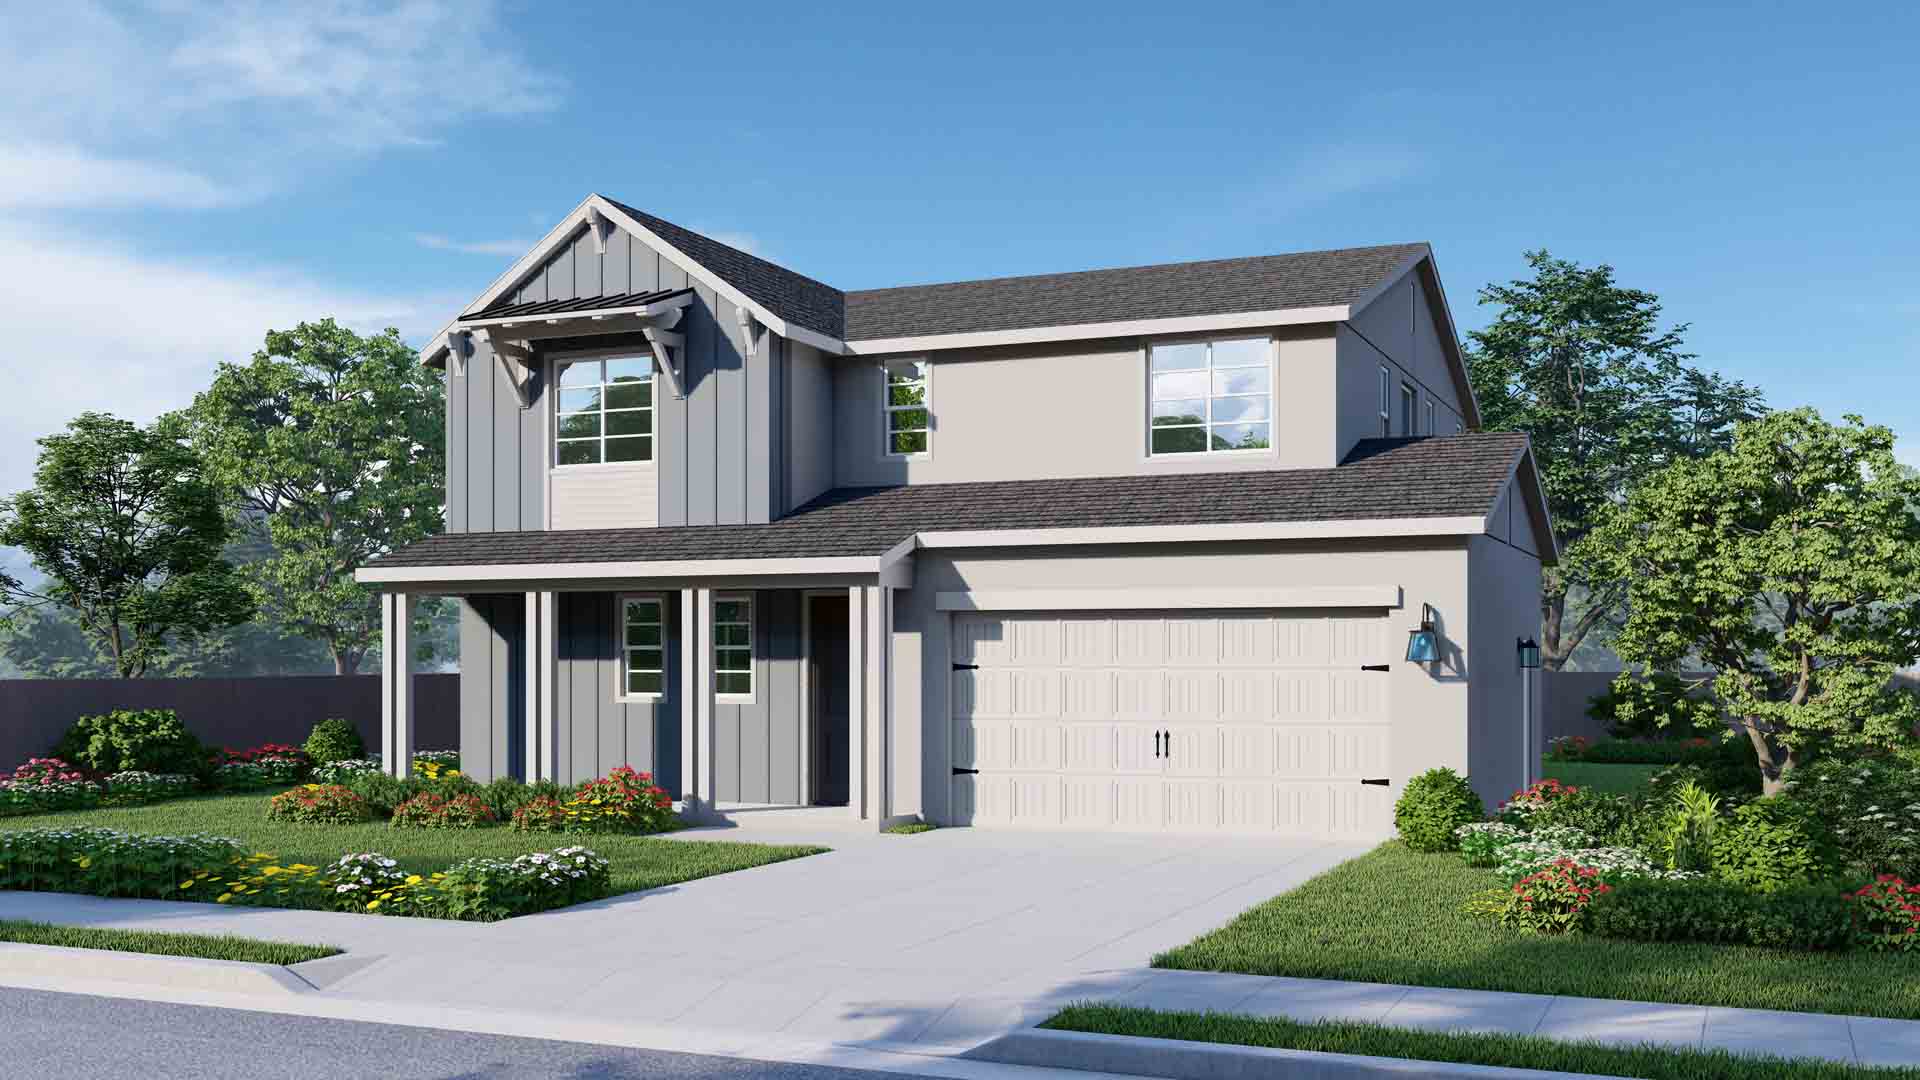 All Monreau elevations are two-story homes. The Modern Farmhouse elevation features trim and details that give it a welcoming farmhouse look. The model pictured has light gray vertical siding on sections of the lower and upper floors, with white trim. The garage door is white and has paneling and metal accents that give it an elevated look.